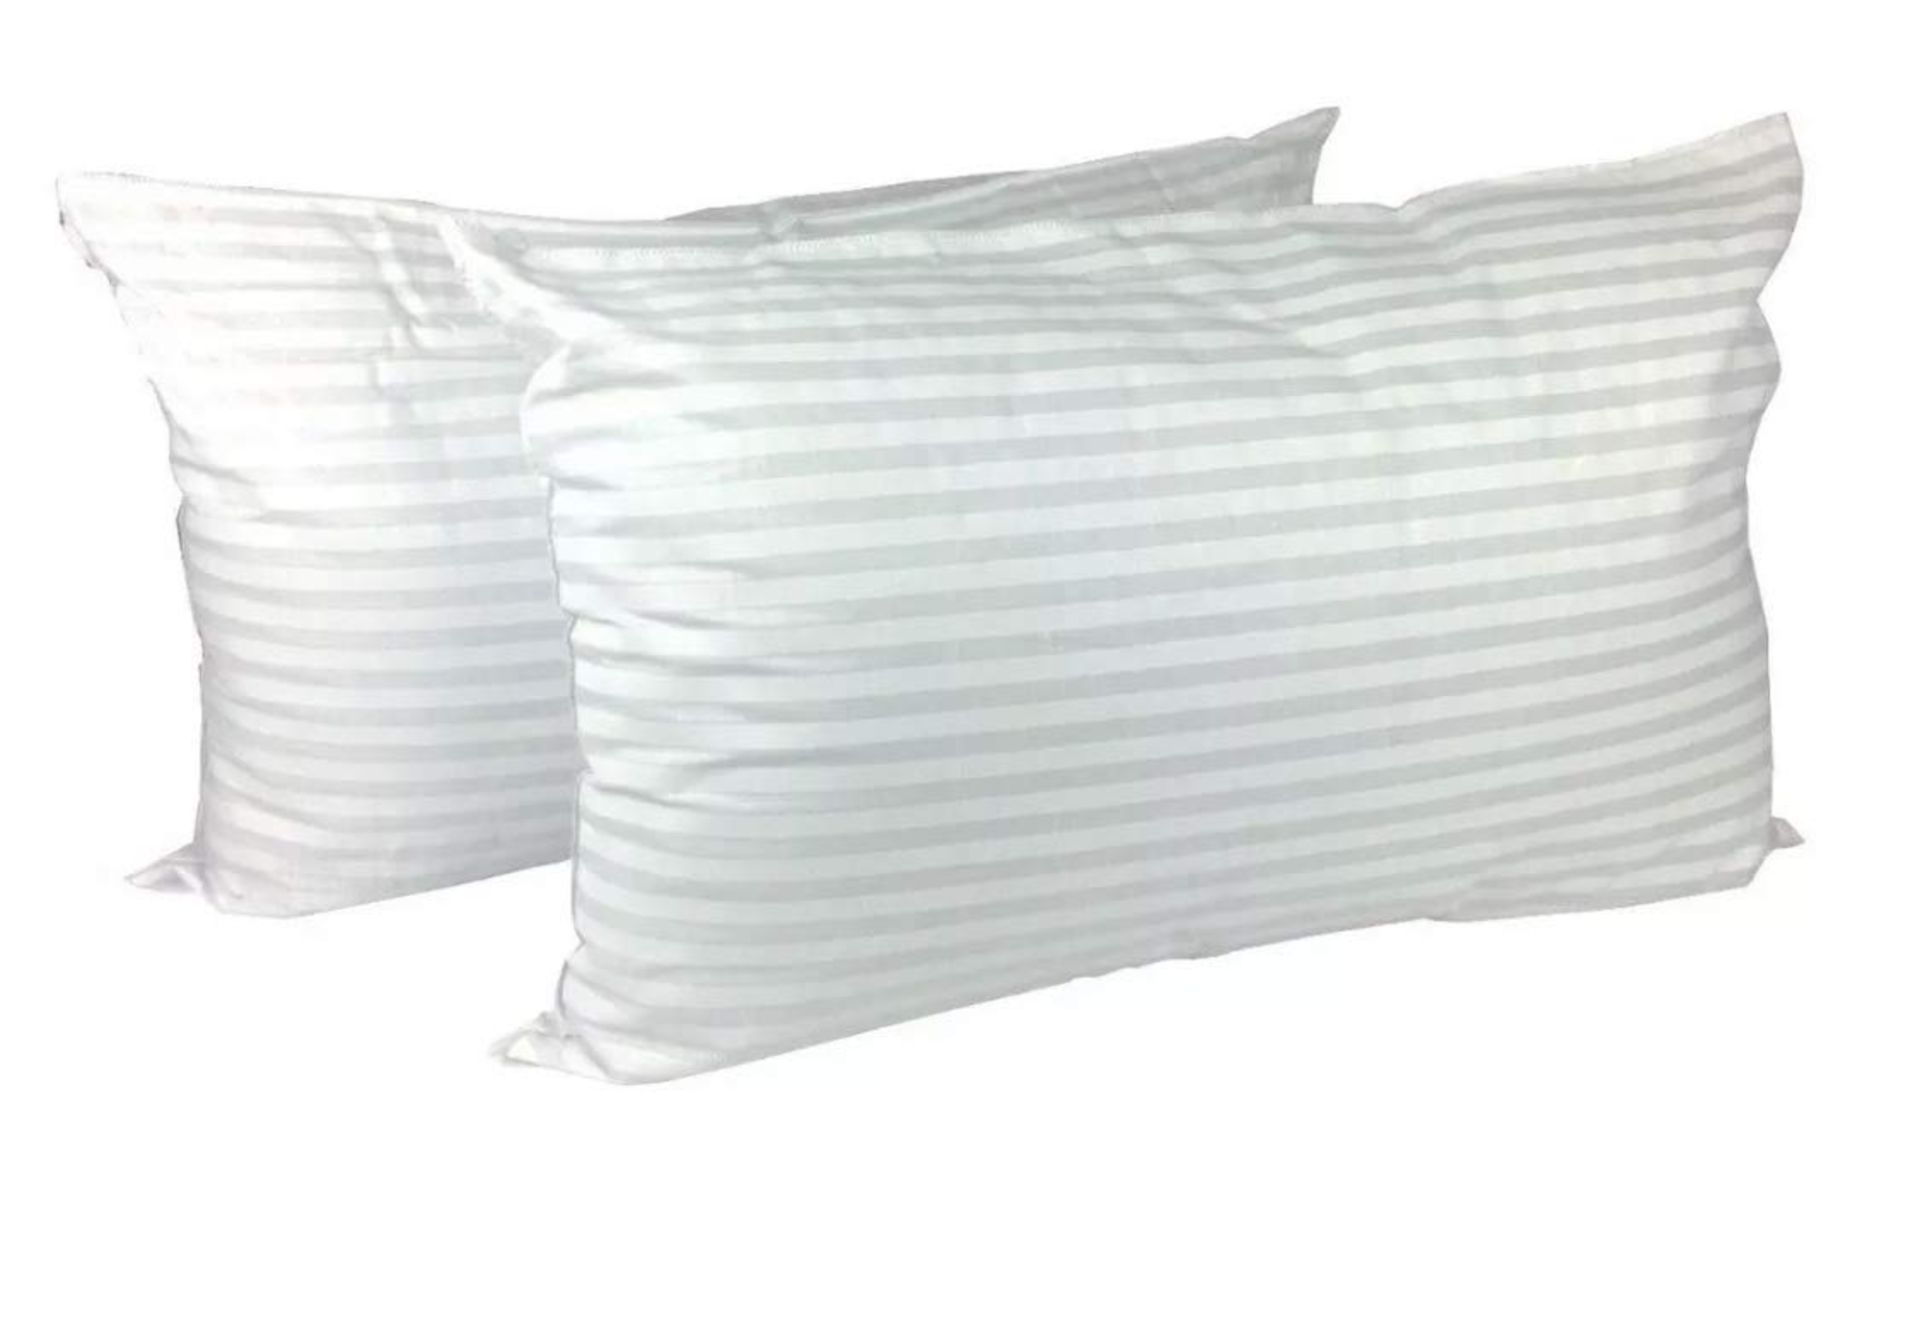 2 Pack Hotel Quality Pillows (Delivery Band A)